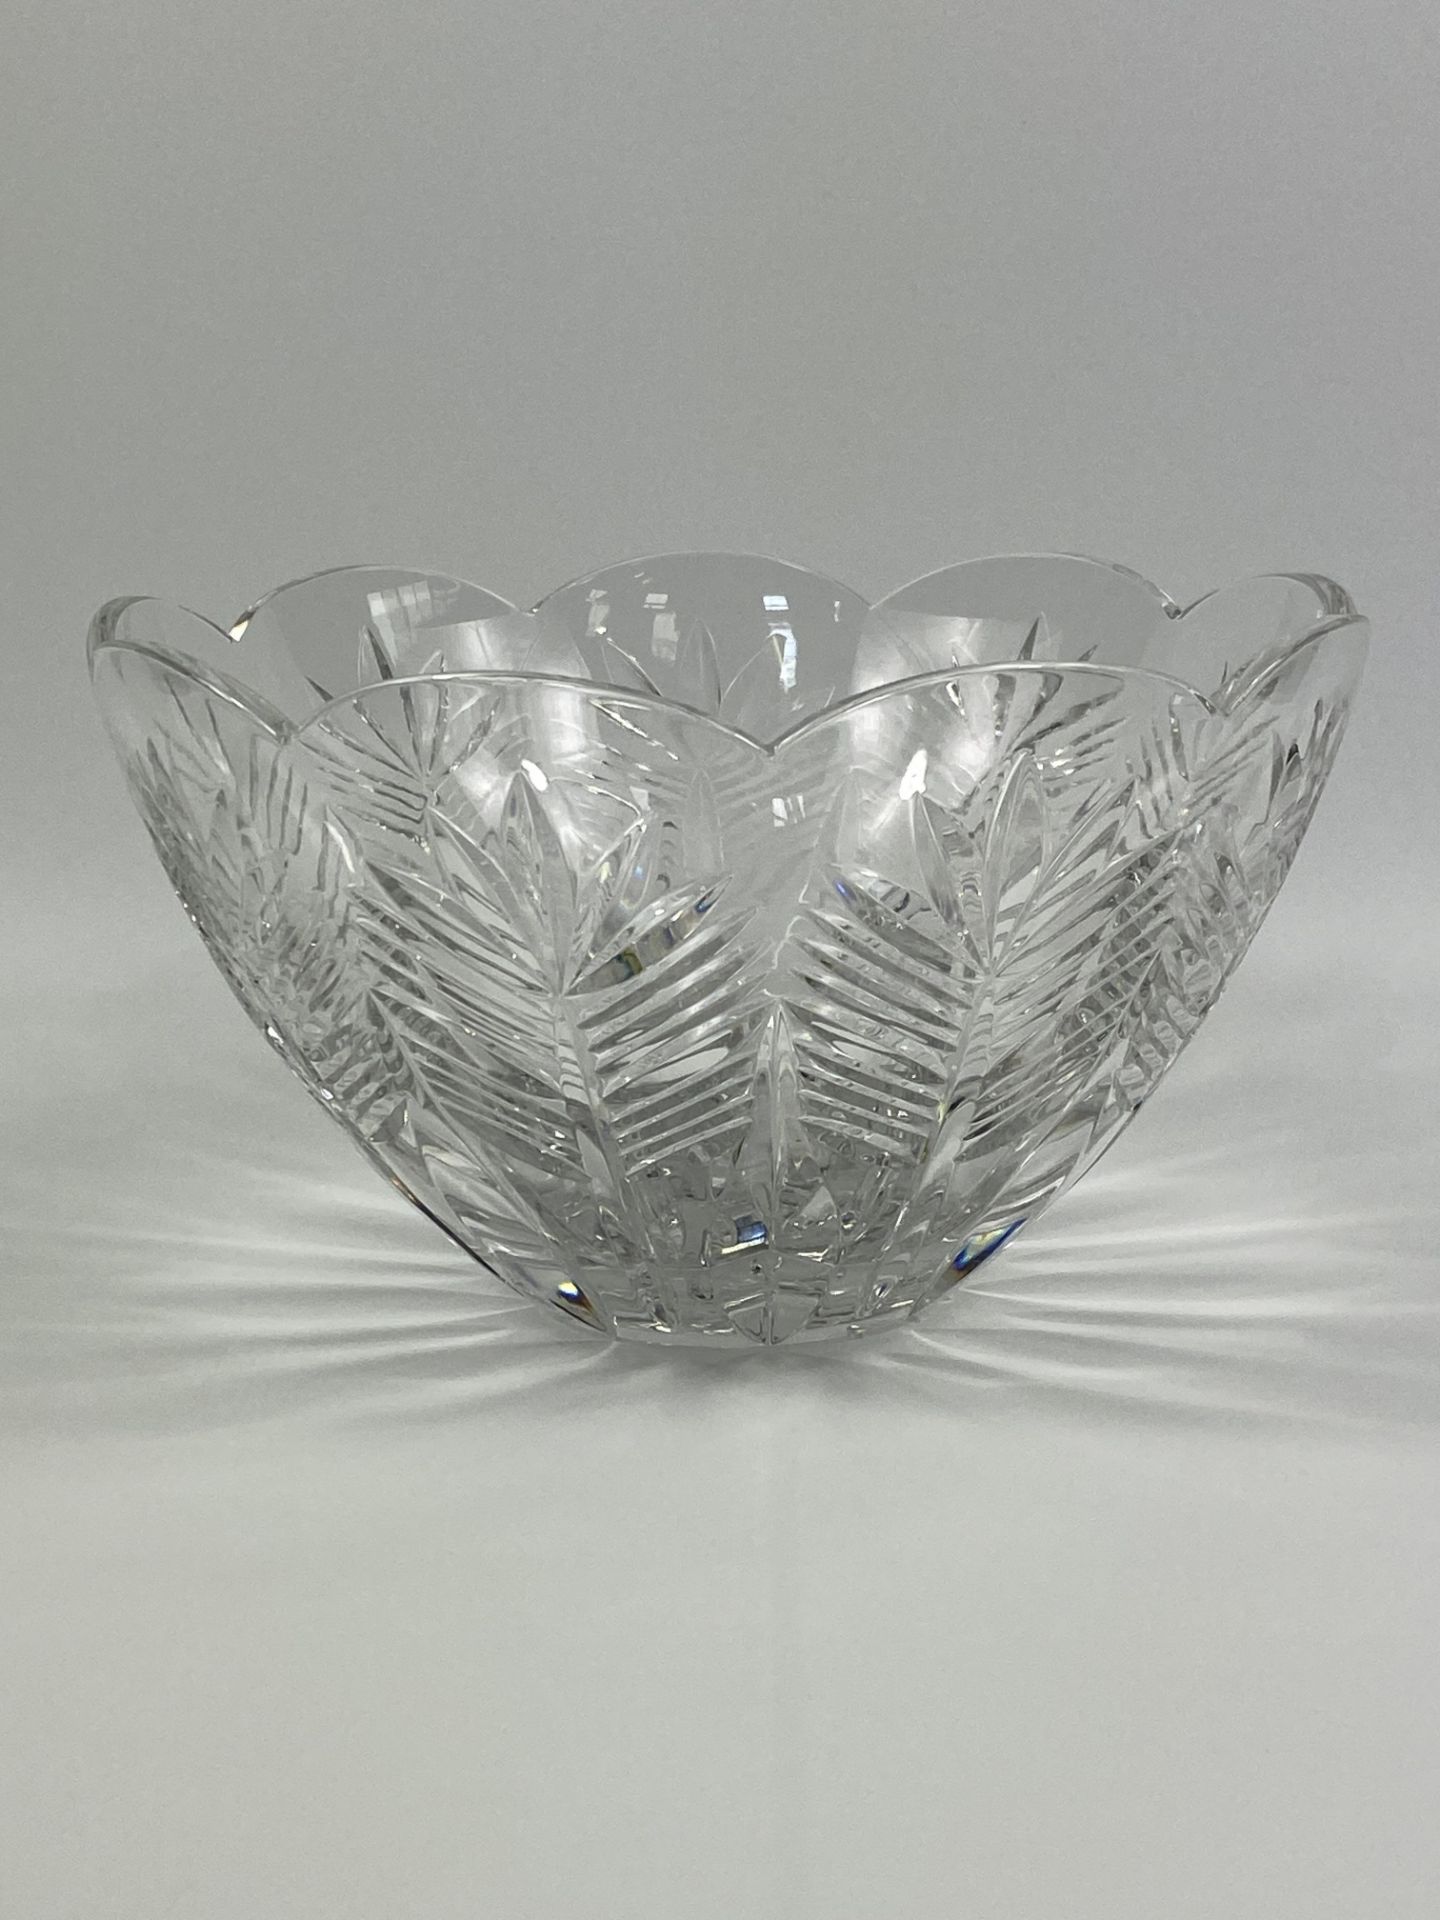 Waterford crystal glass bowl - Image 3 of 6